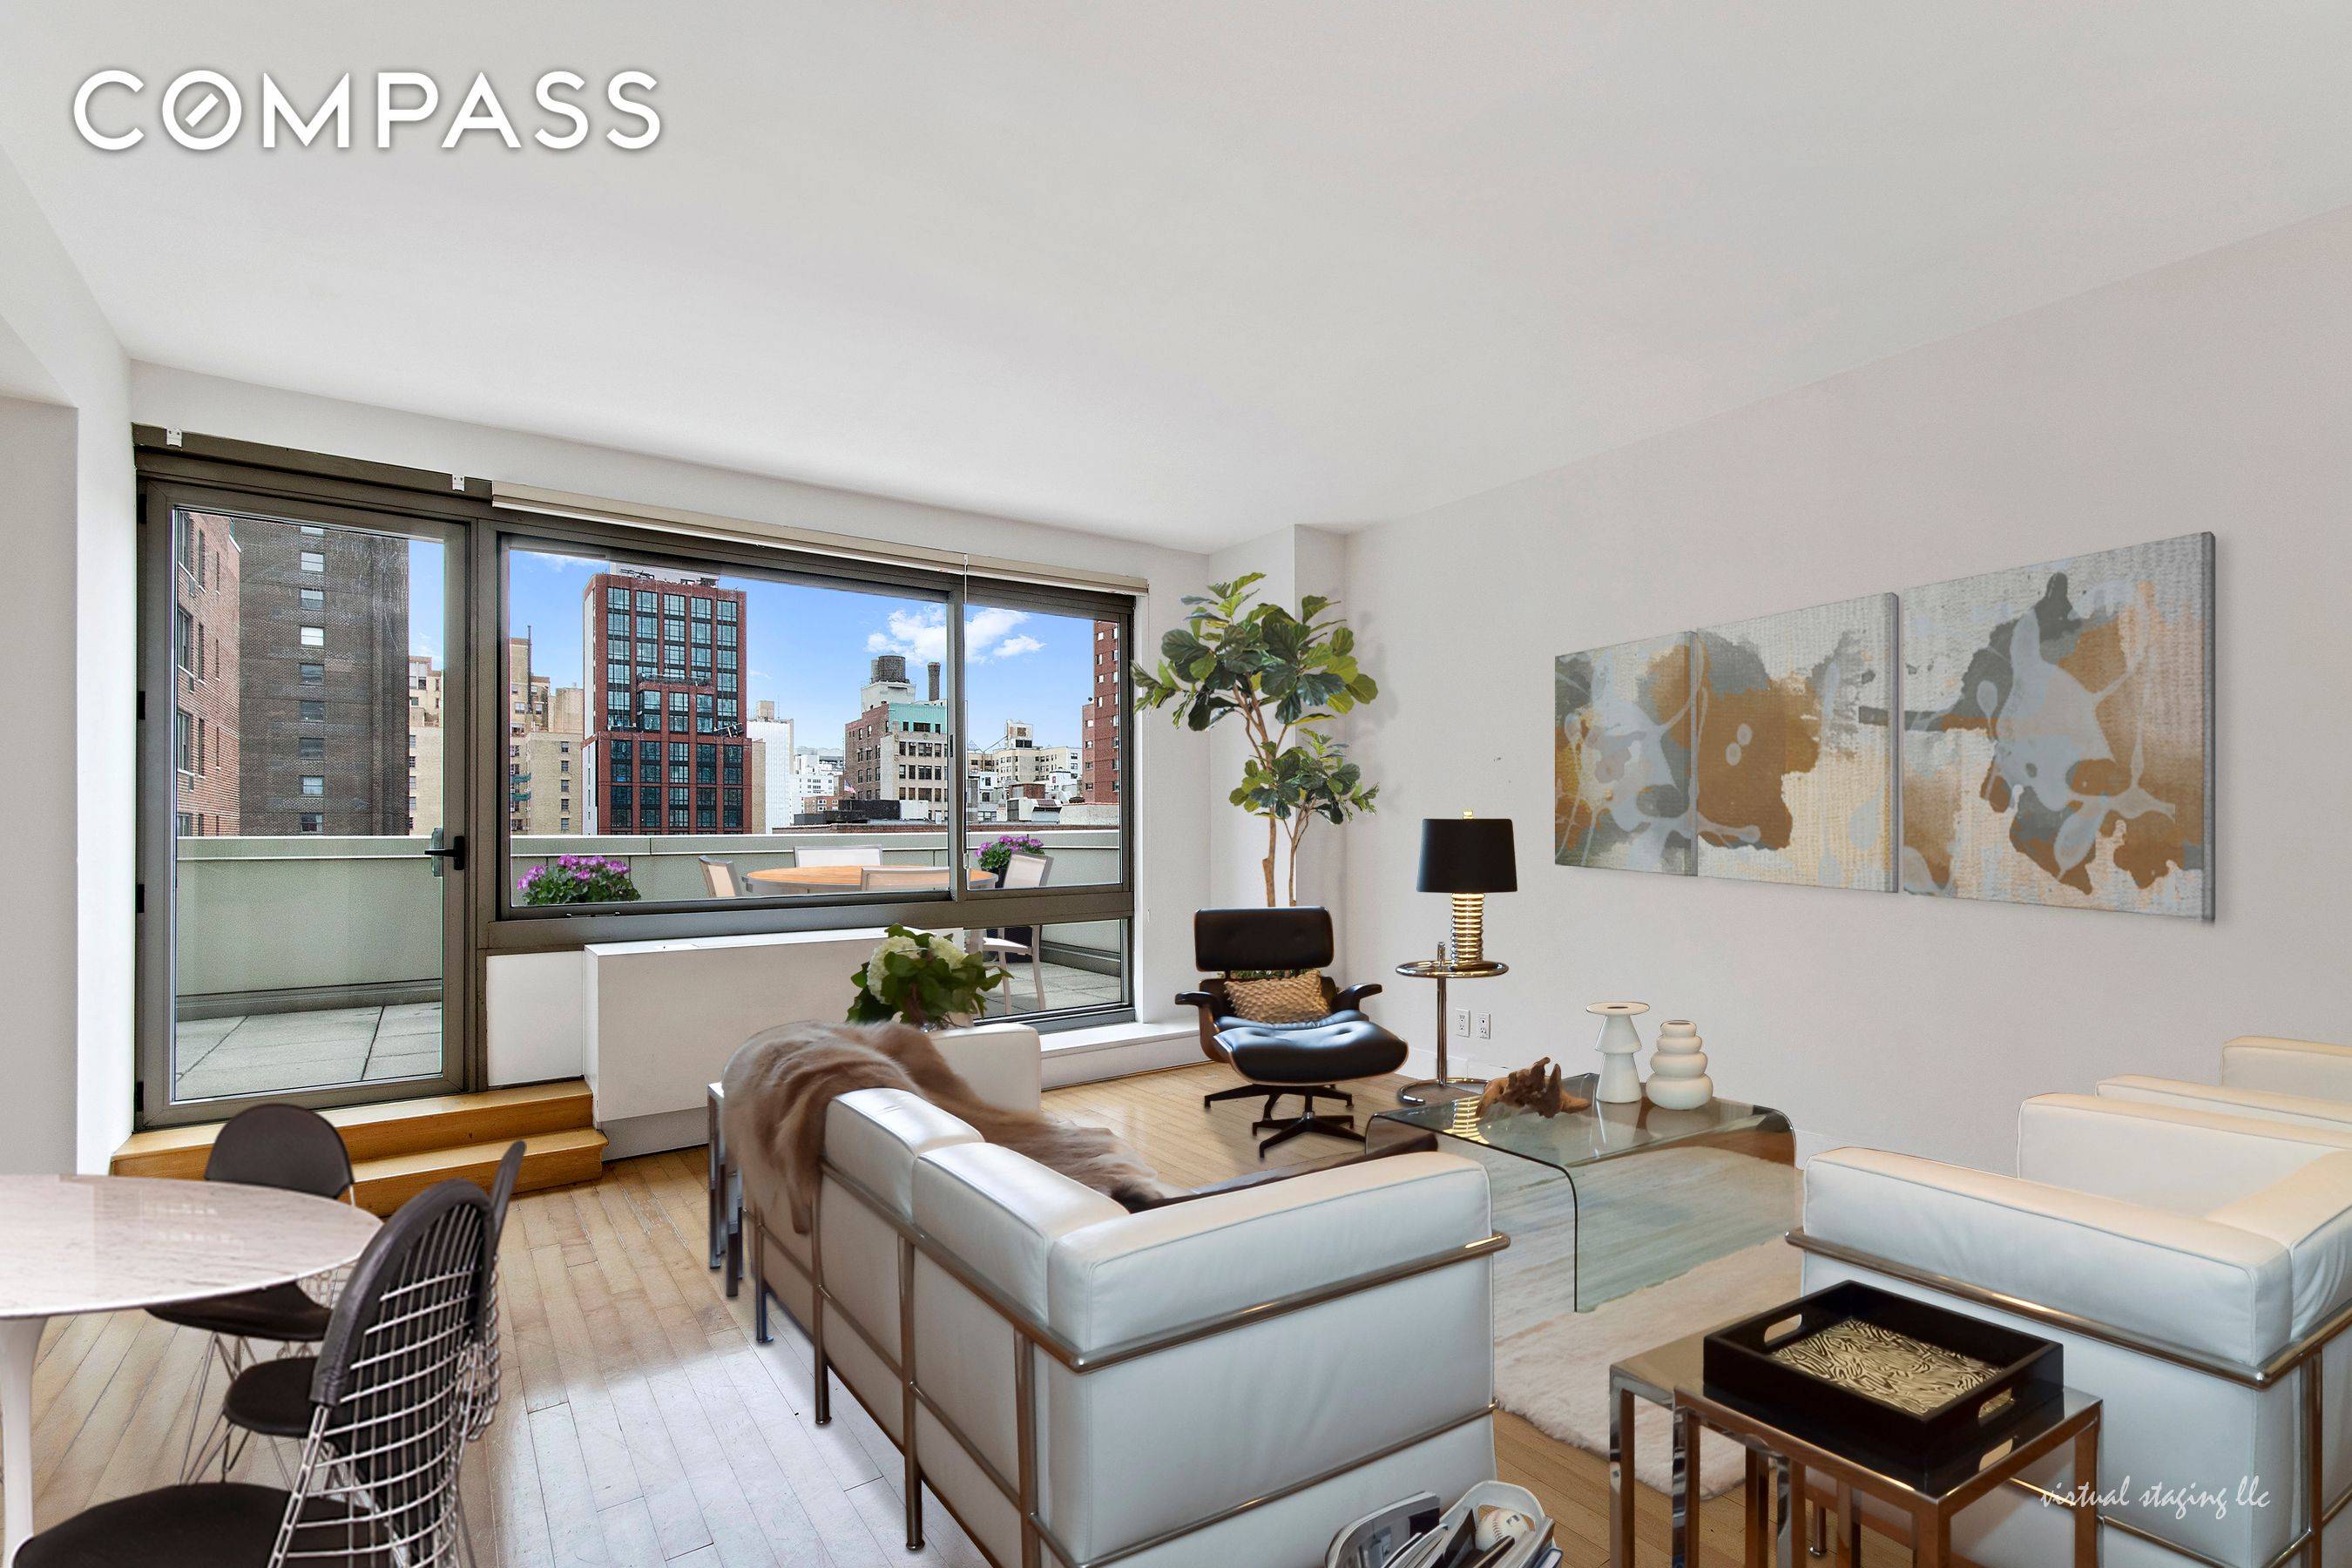 Welcome to Apartment 10B at 242 East 25th Street located in a boutique building at the border of Gramercy and Kips Bay.